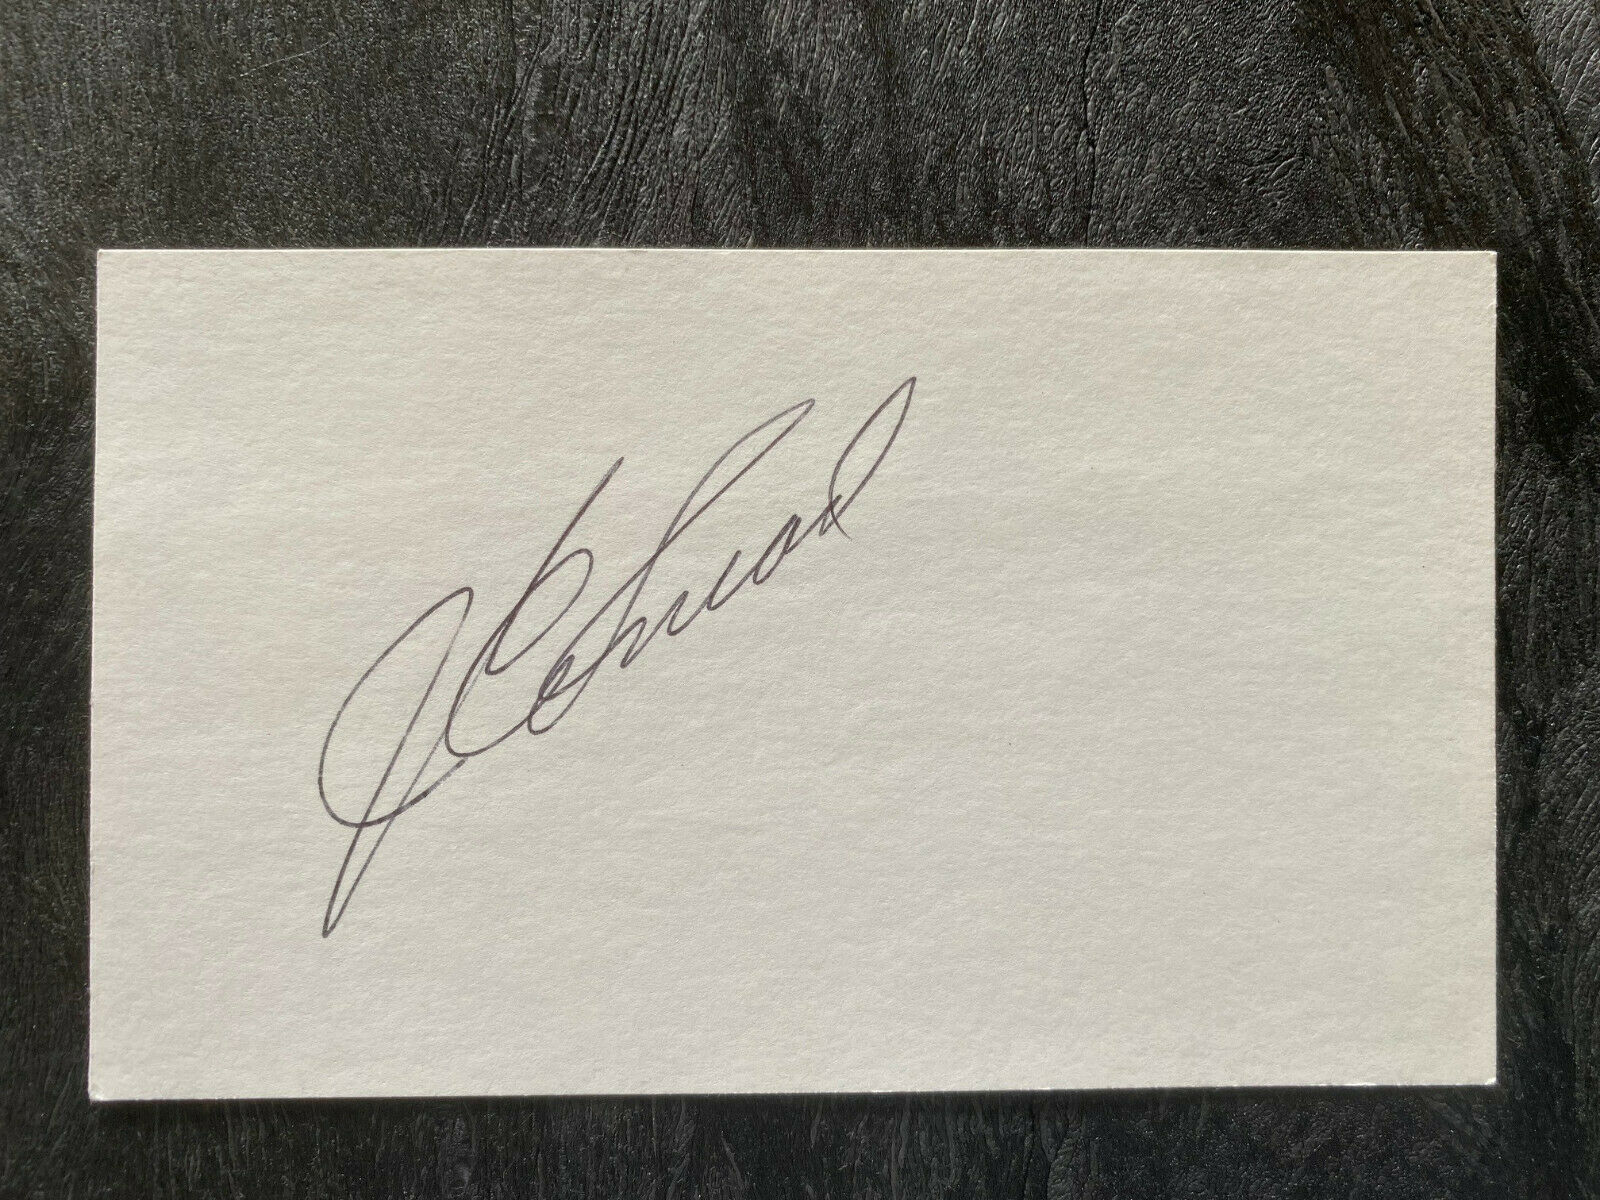 J C Snead Autographed Hand Signed 3 X 5 Index Card - Pga Champions Tour